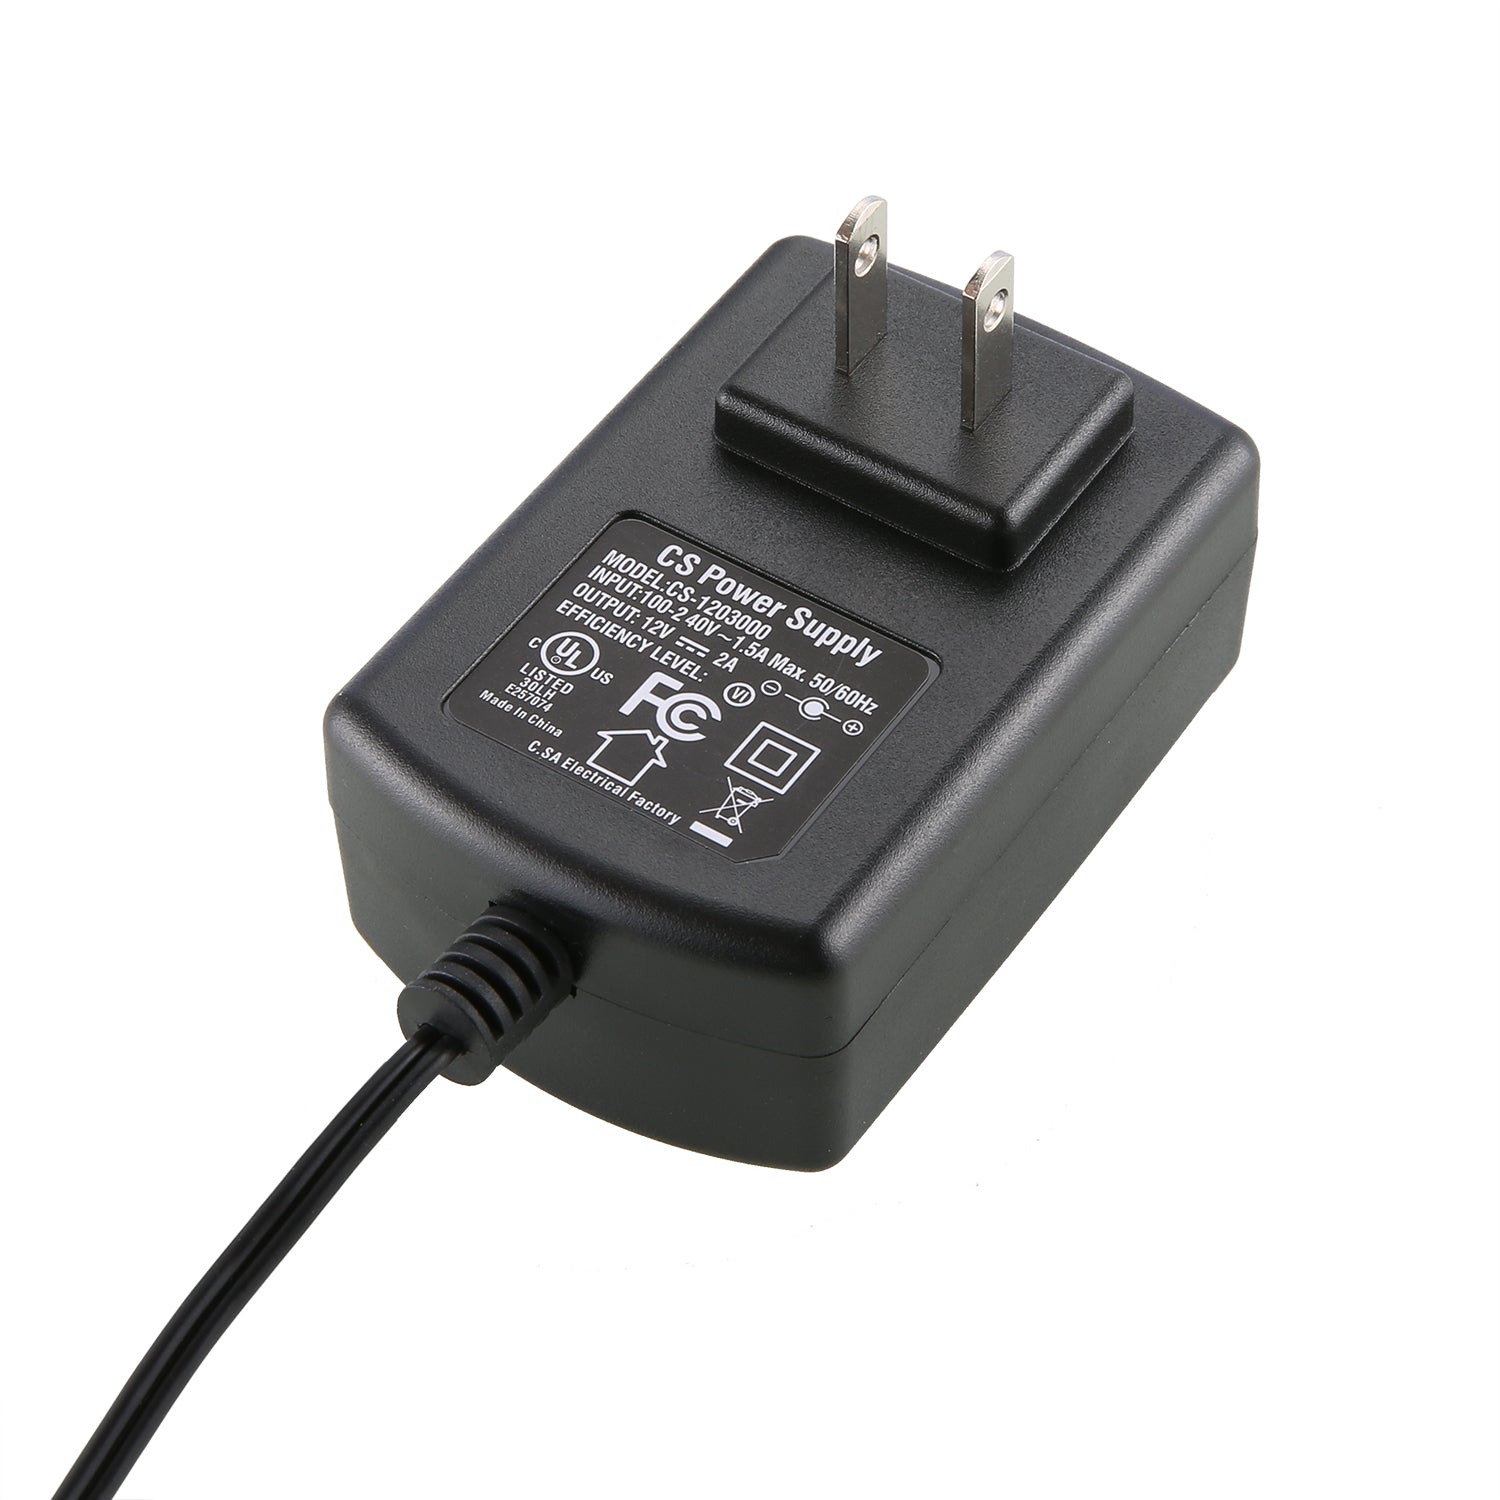 12V 2A US Power Supply Power Adapter, UL-Listed, Power Cord with